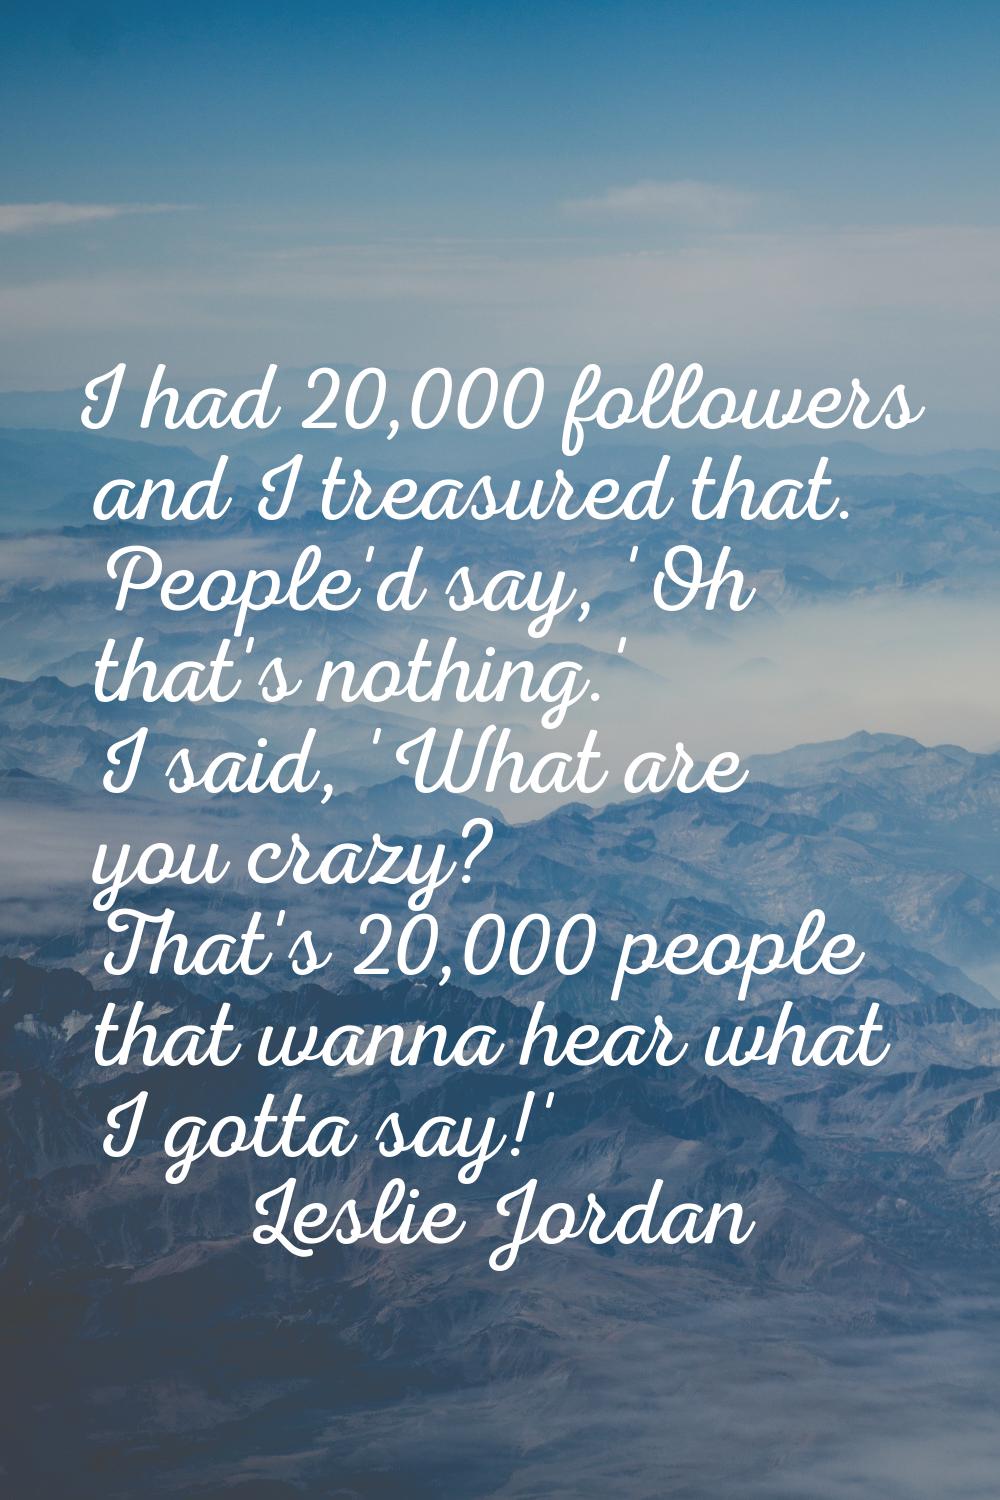 I had 20,000 followers and I treasured that. People'd say, 'Oh that's nothing.' I said, 'What are y